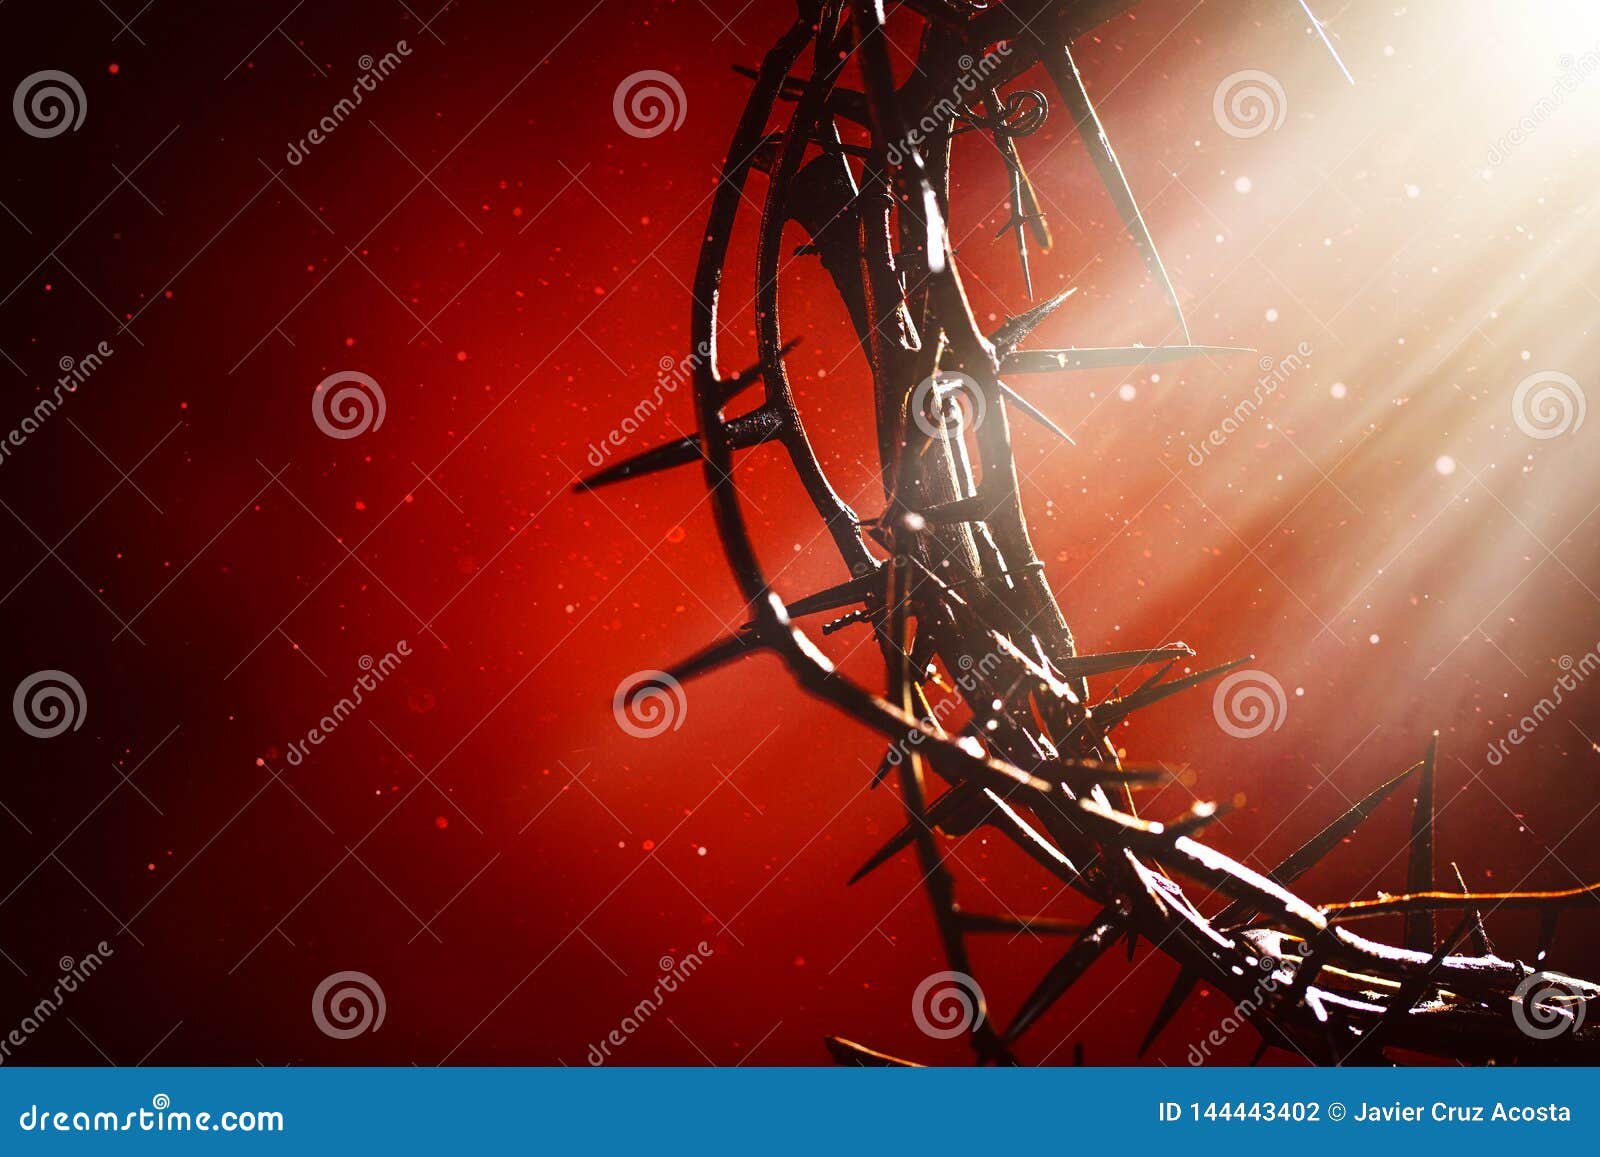 crown of thorns an emblem of christ`s passion